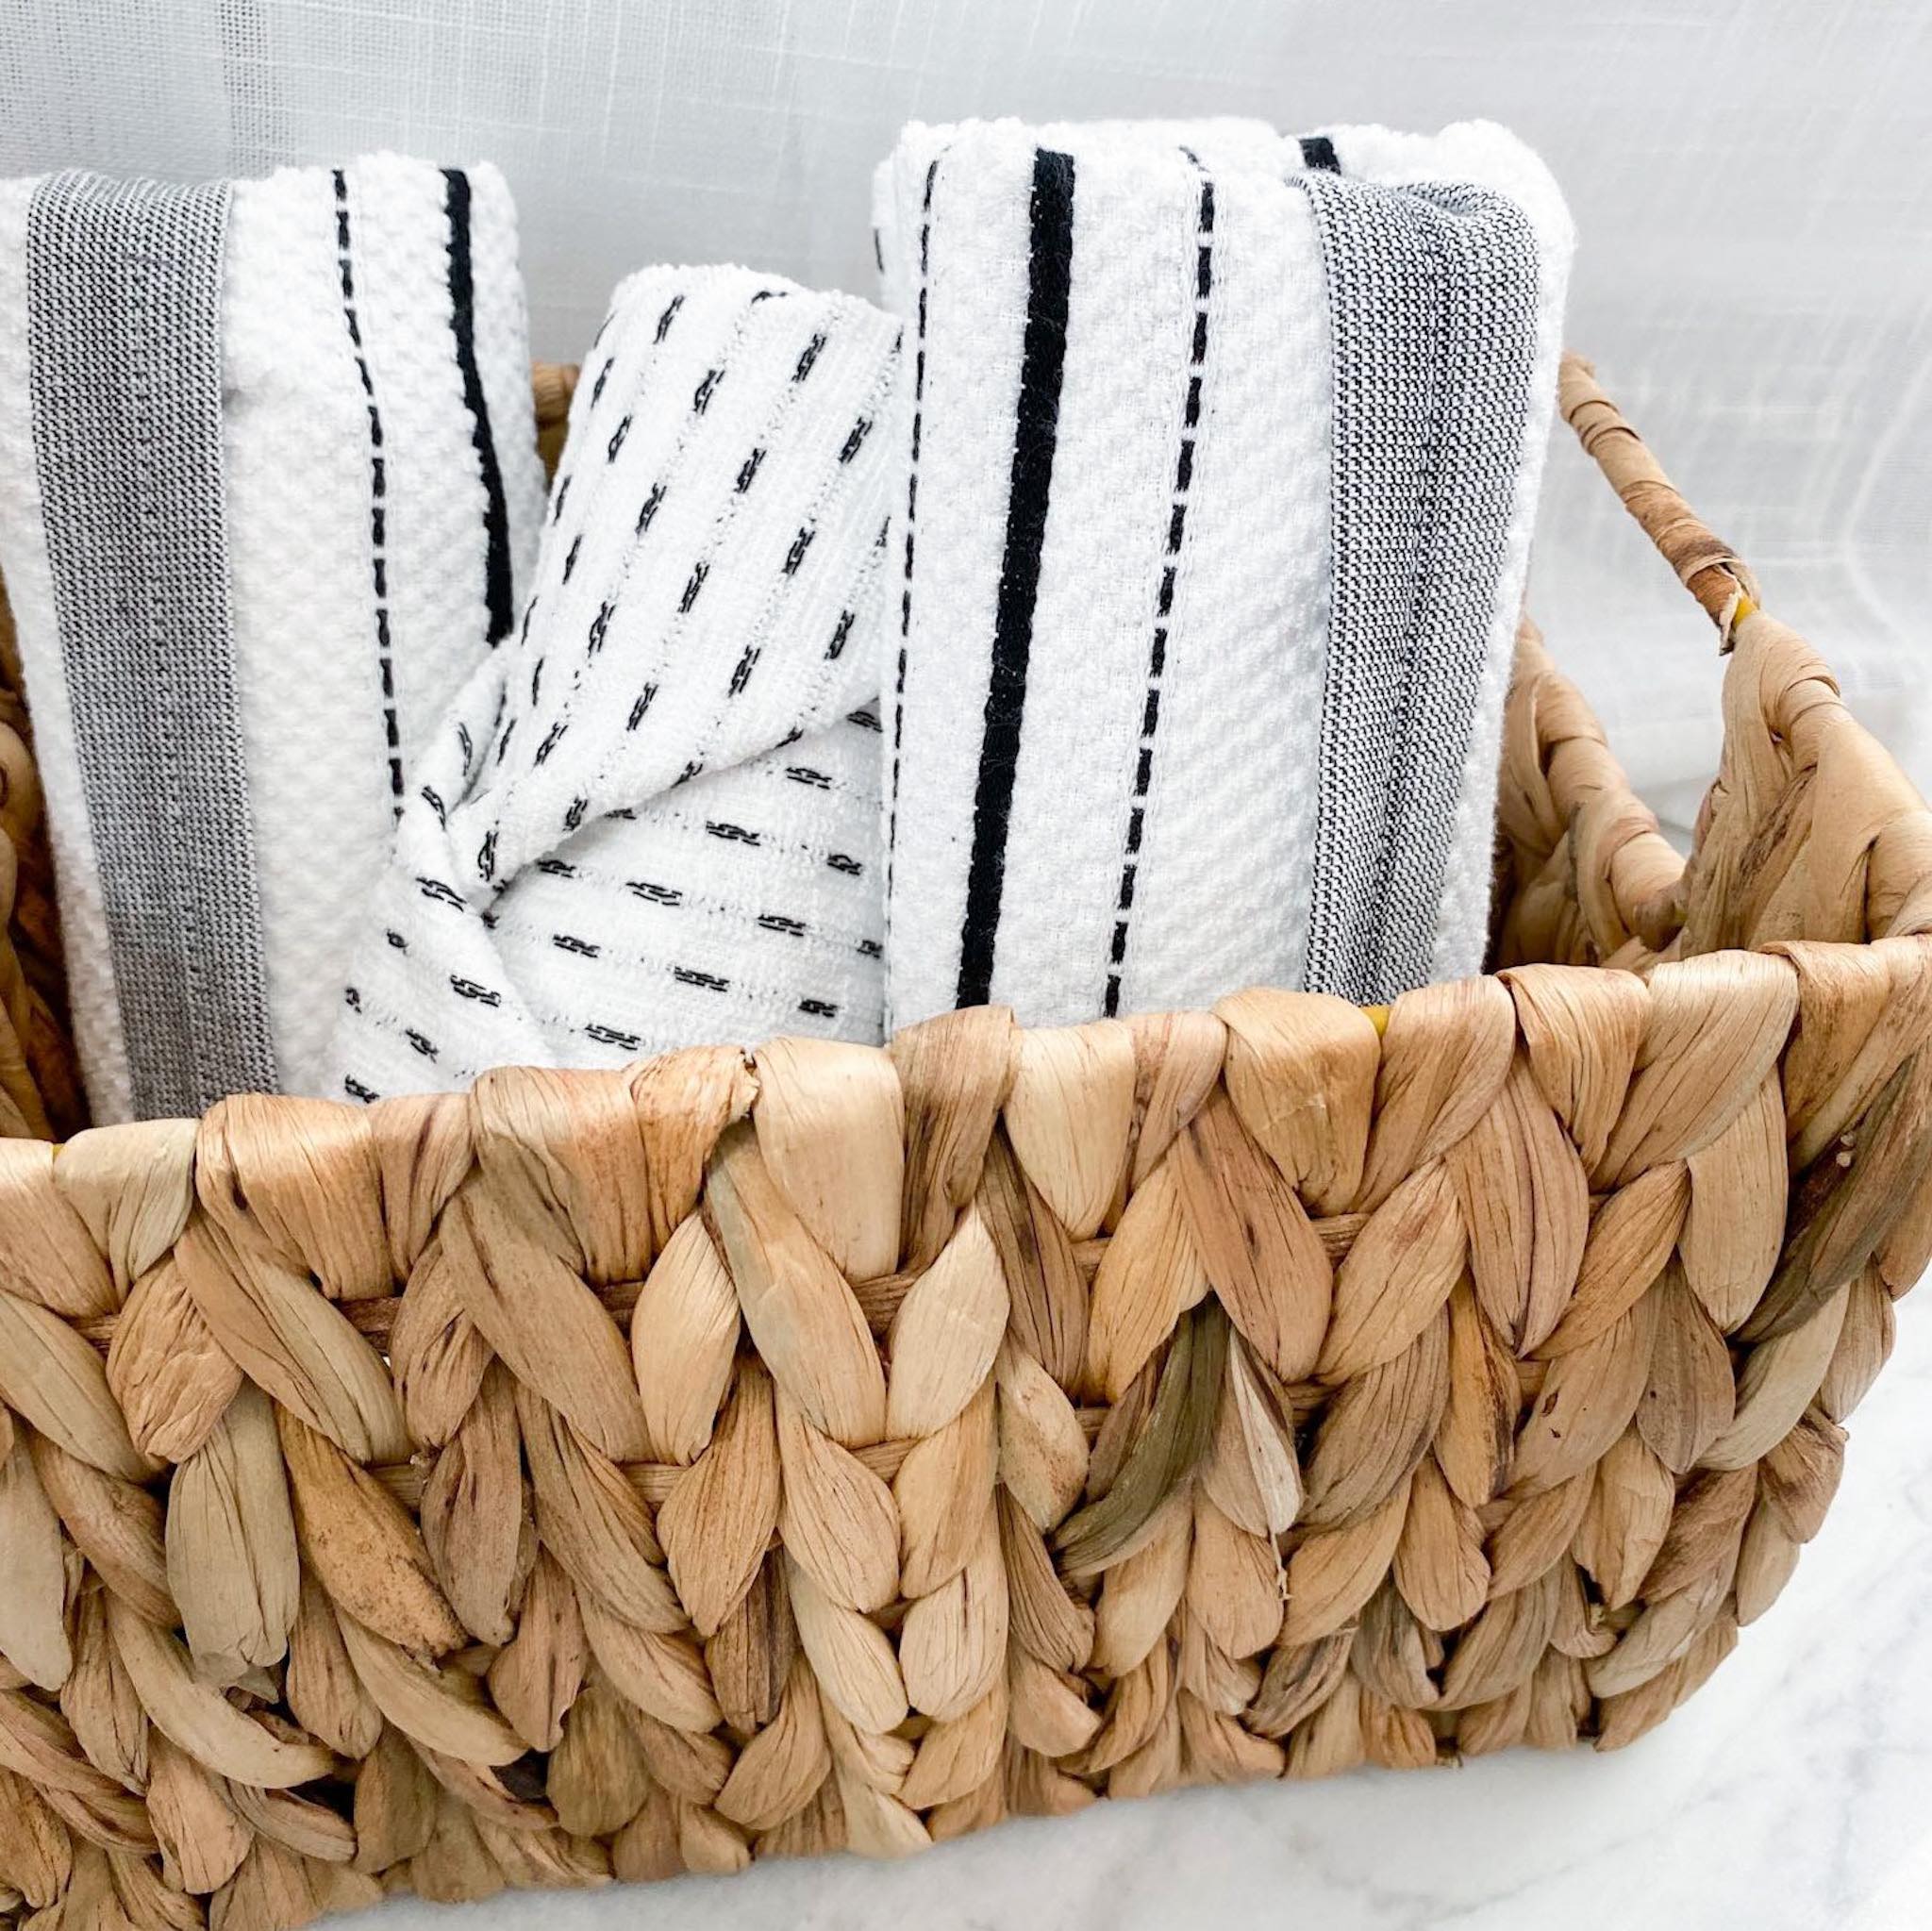 The Best and Worst Places to Hang Your Kitchen Towels